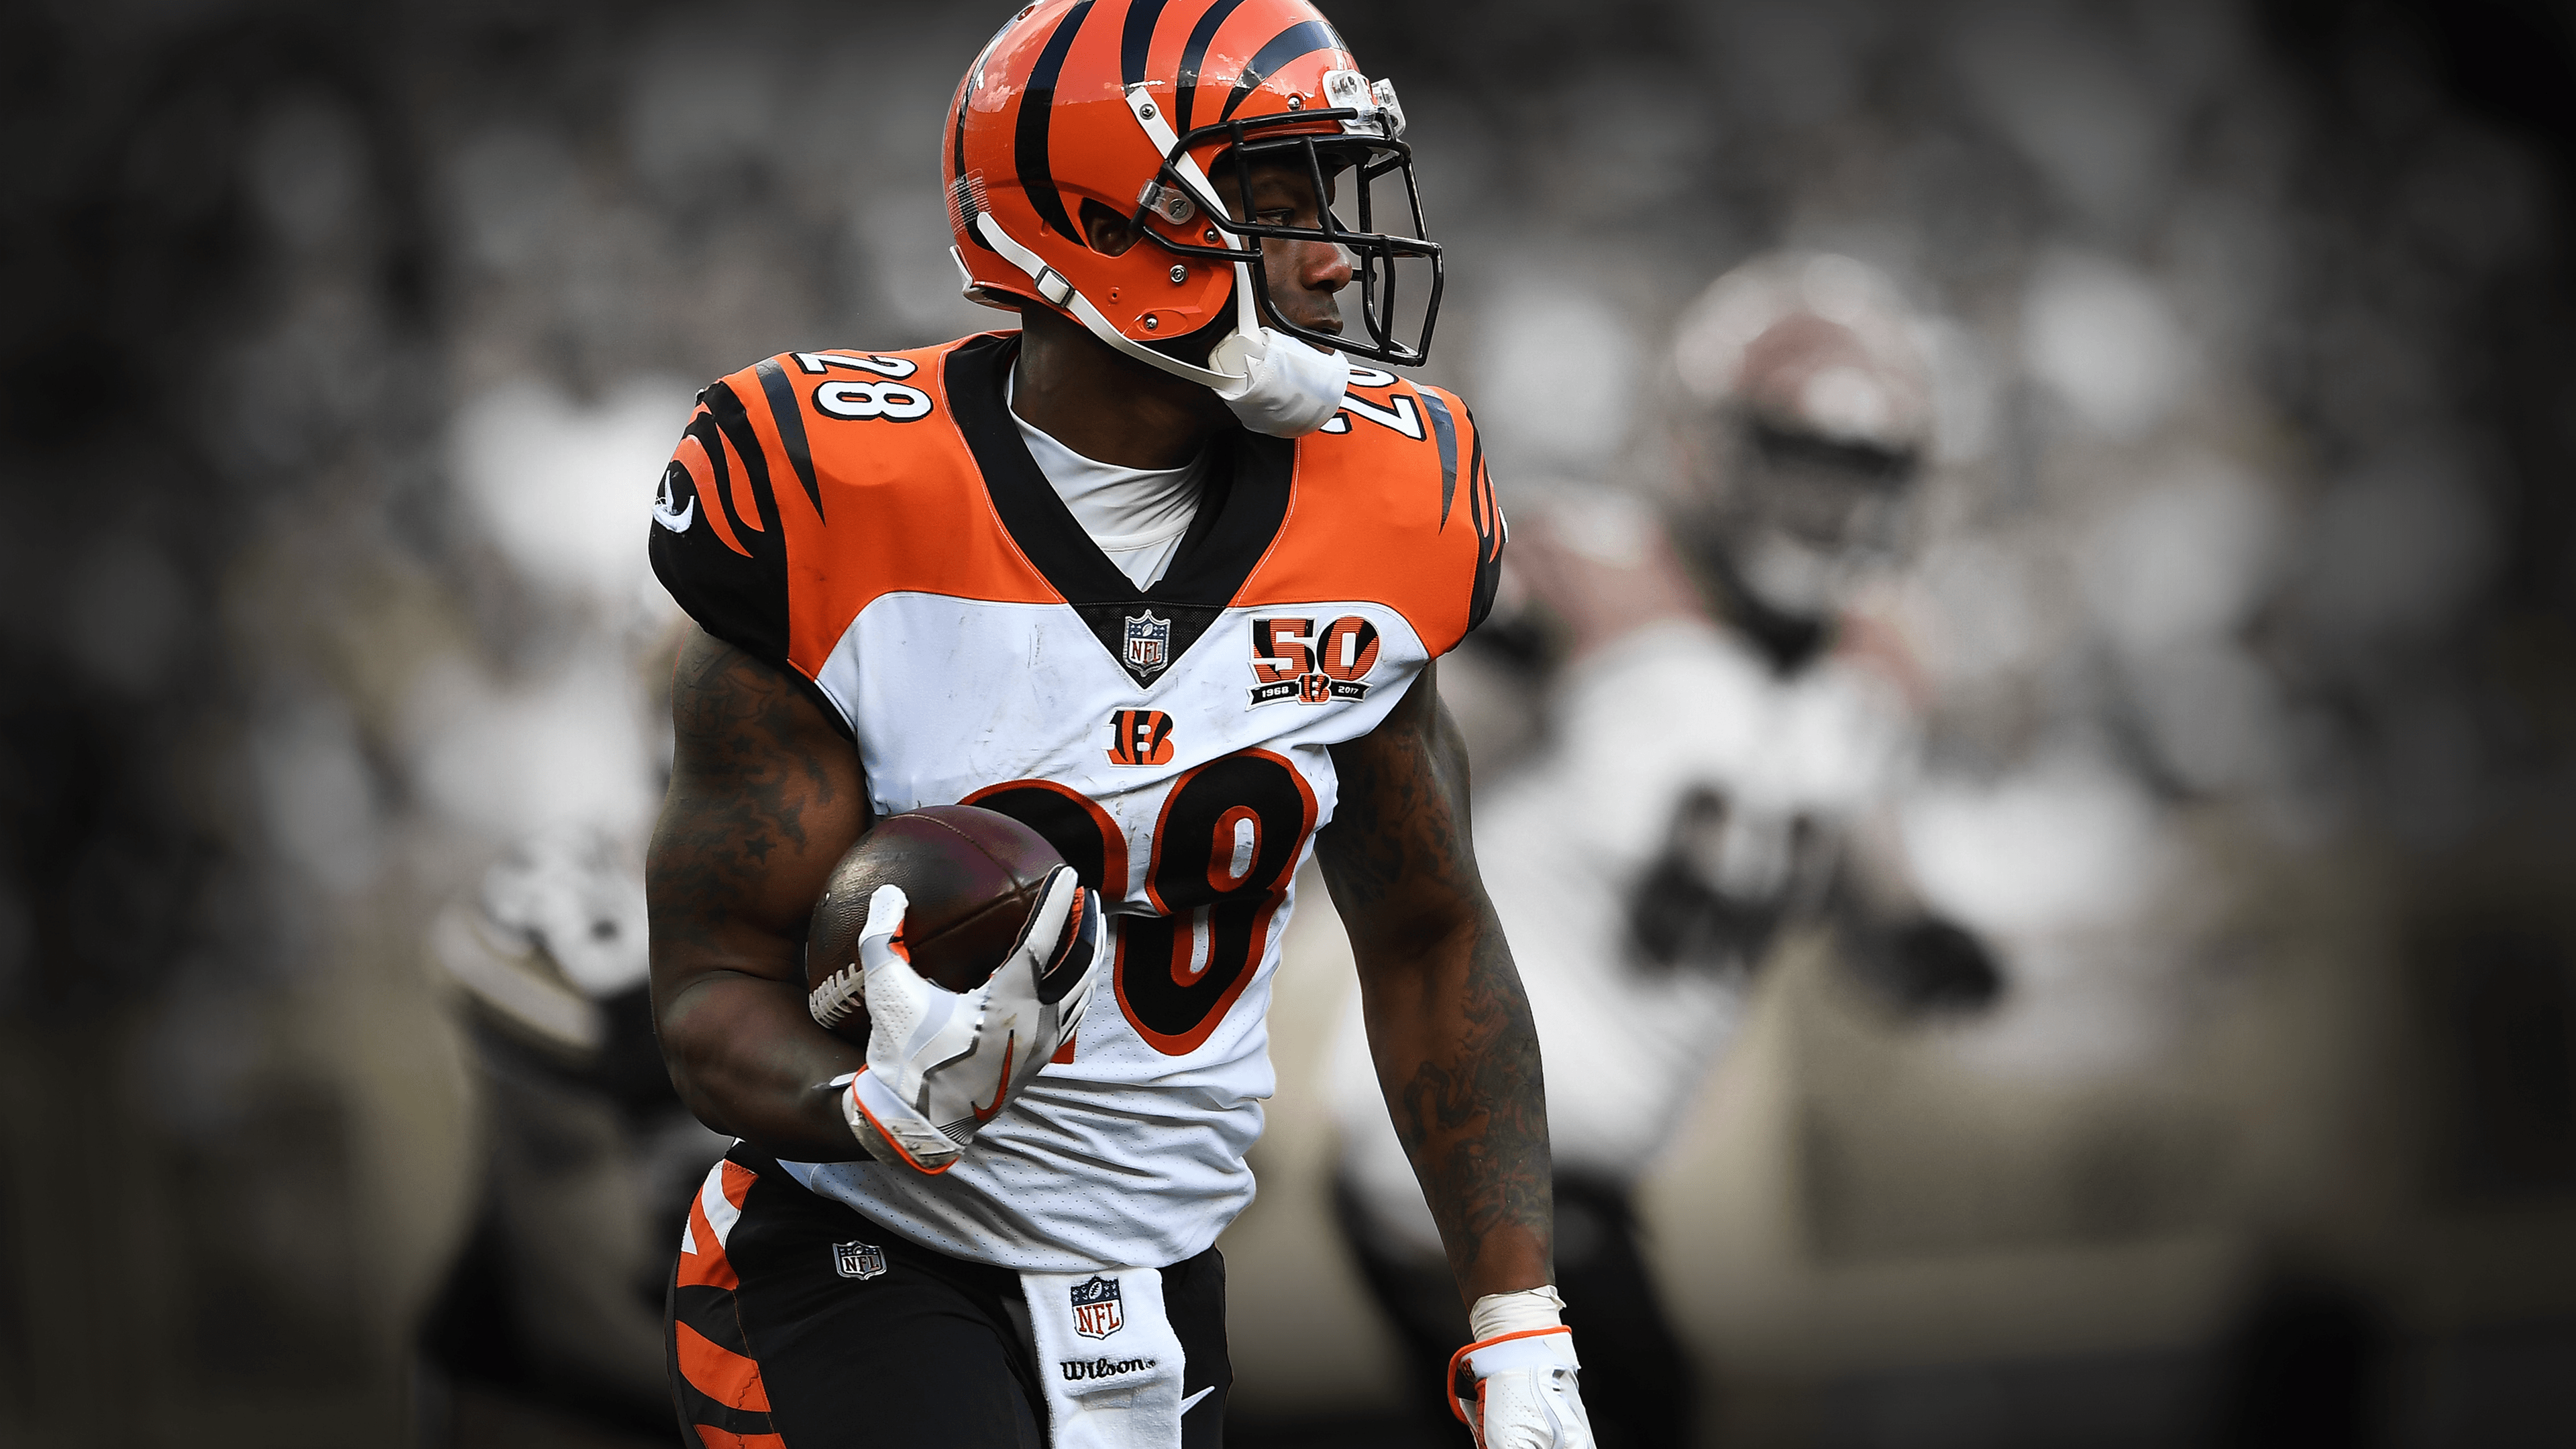 I made a new Joe Mixon desktop wallpaper. Let me know what you guys